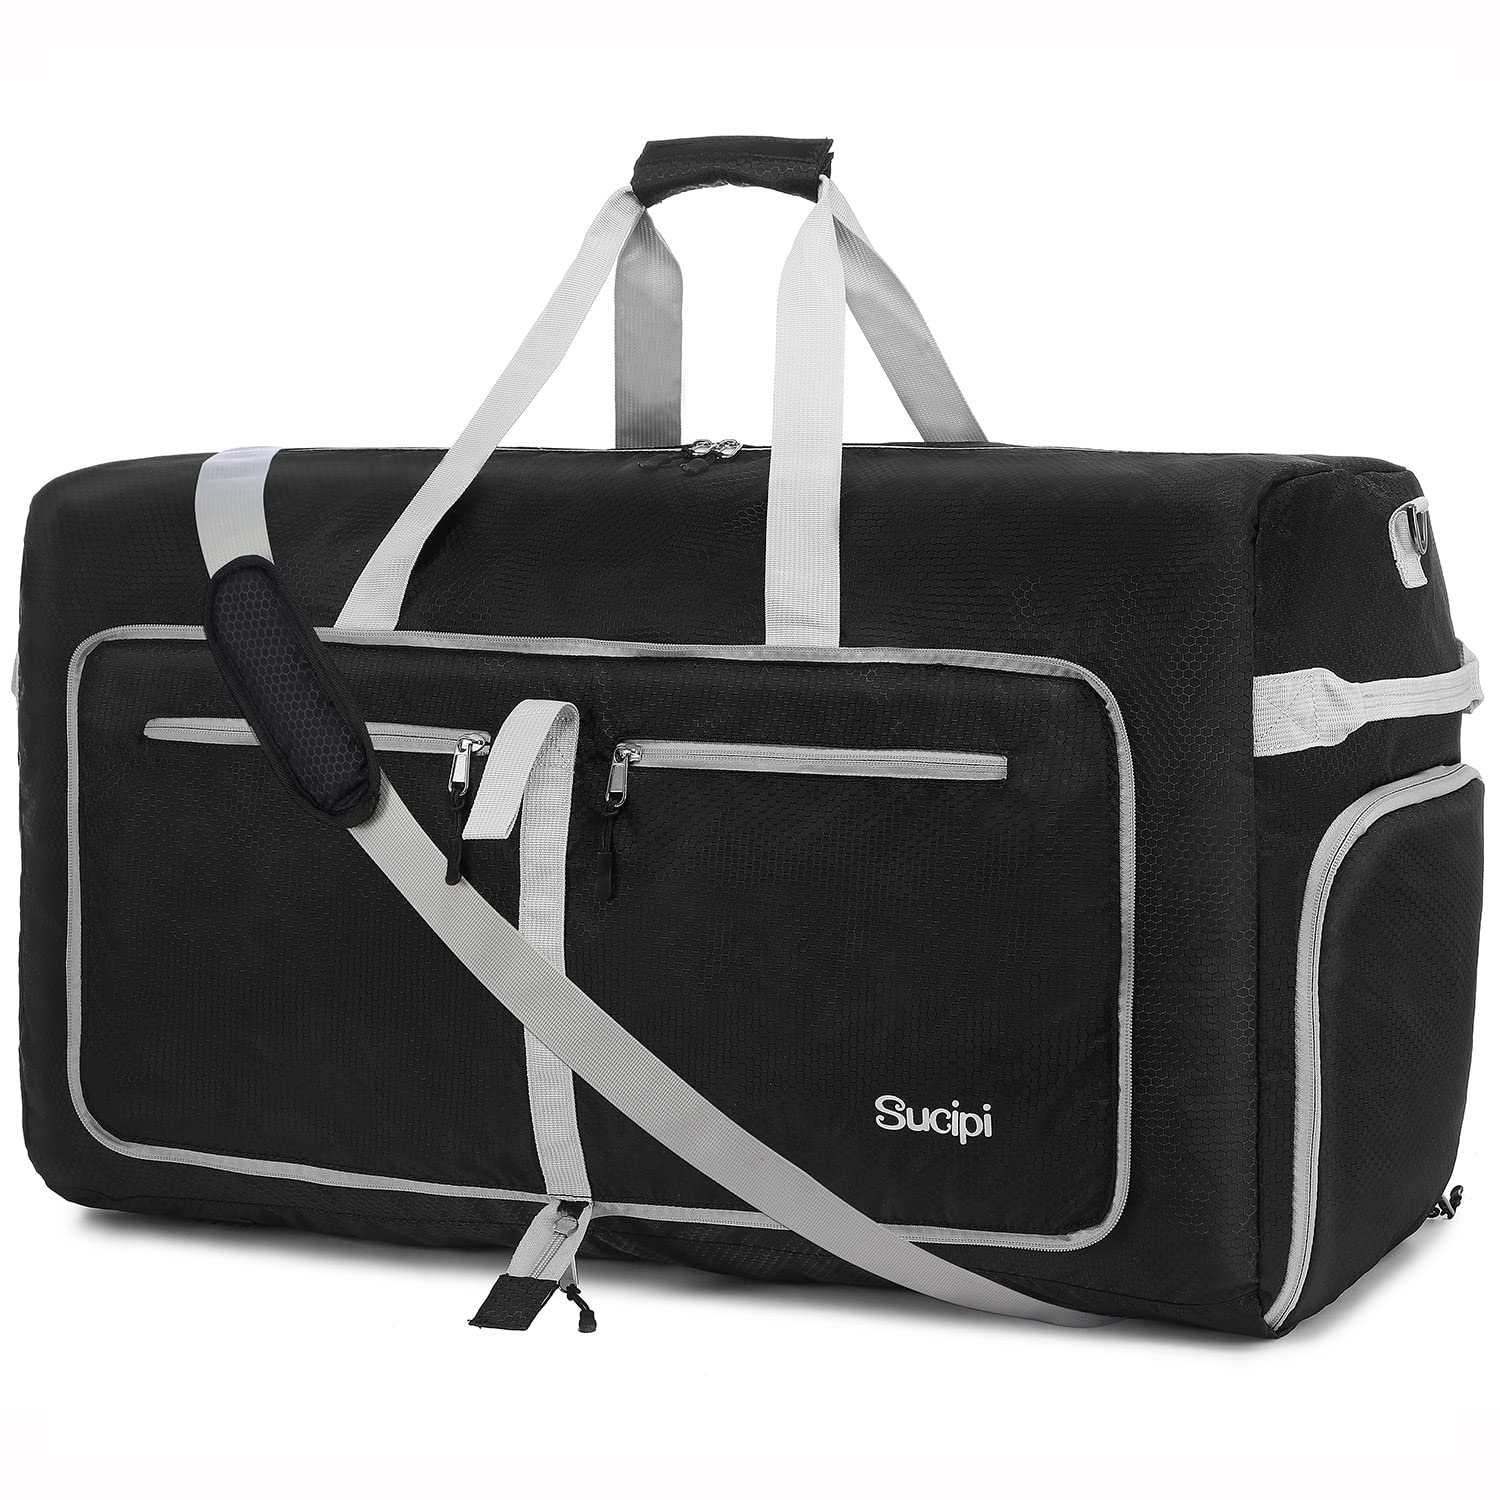 Sucipi Foldable Travel Duffle Bag 80L Packable Weekender Review ...